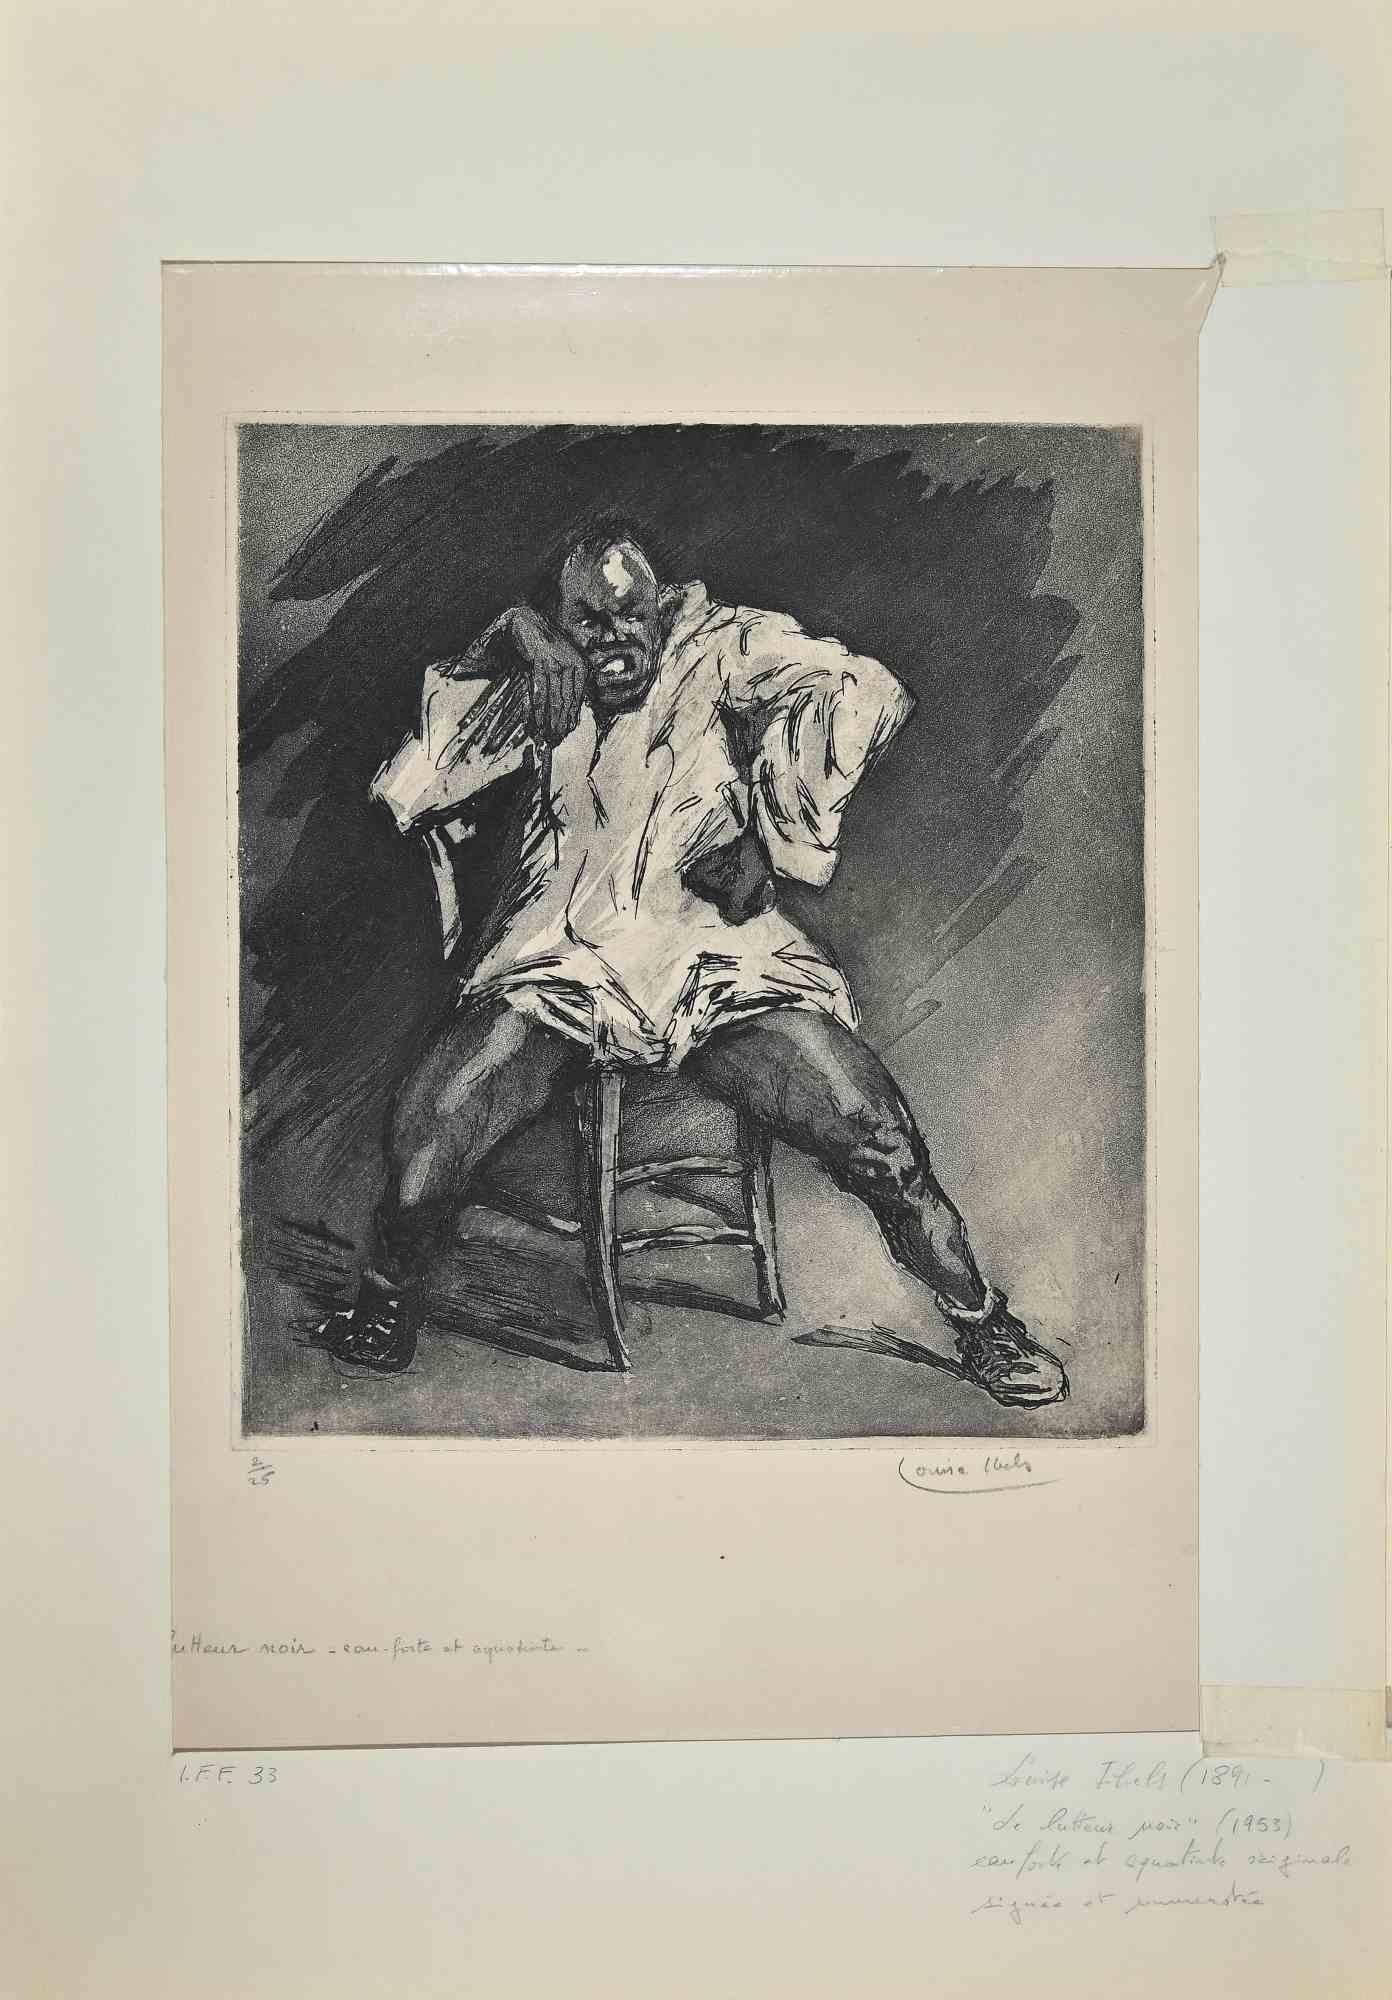 Black Fighter is an Etching realized by Louise Thels in 1953.

The artwork is in good condition on a yellowed paper, included a cardboard passpartout (55x37.5 cm).

Hand-signed by the artist on the lower right corner.

Numbered 2/25 on the lower